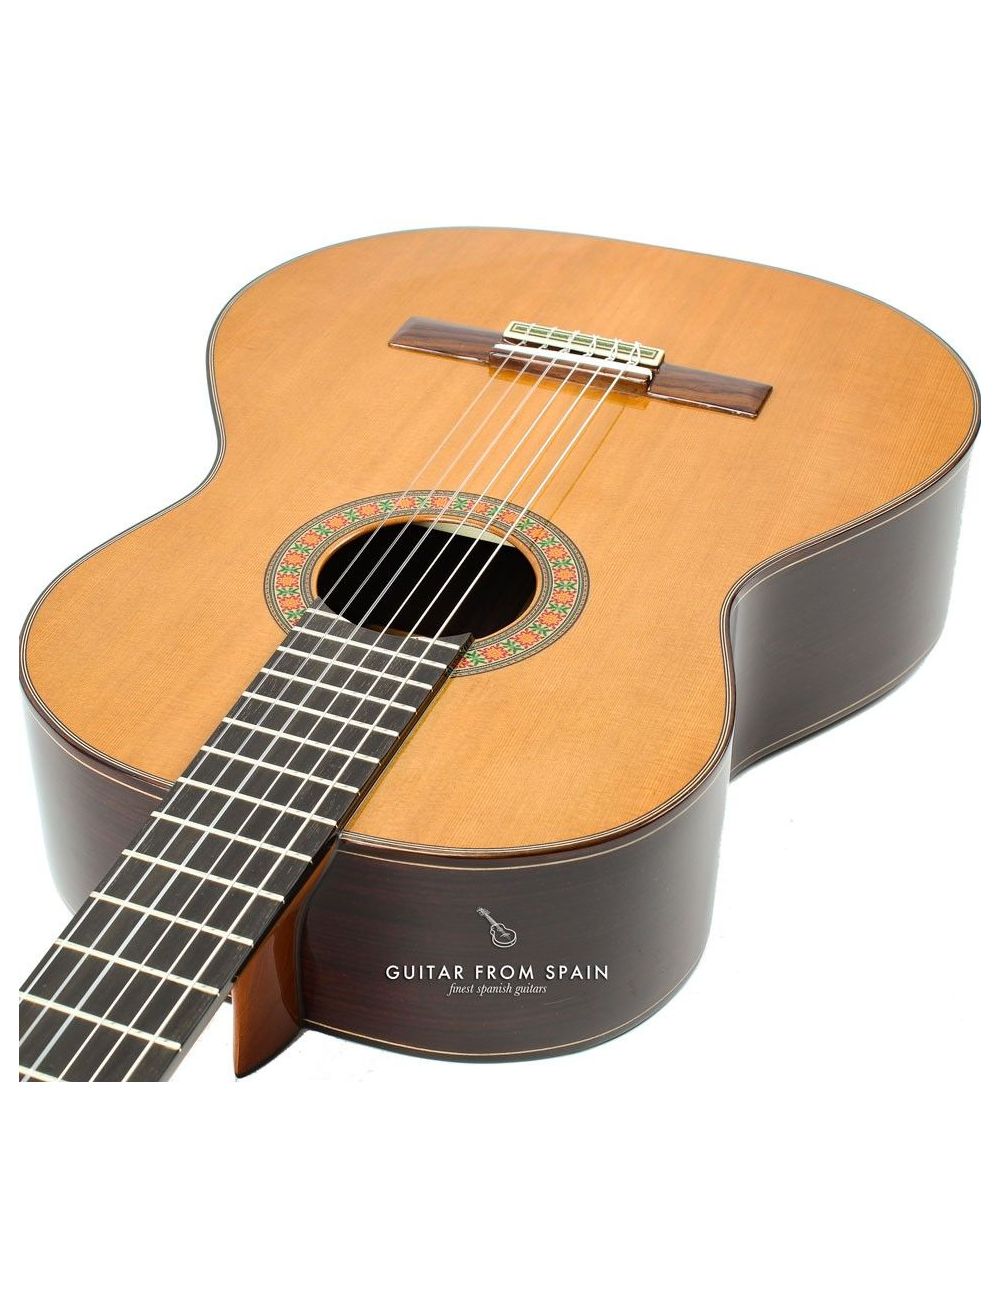 Alhambra 9P 7/8 Classical Guitar S9P Special sizes